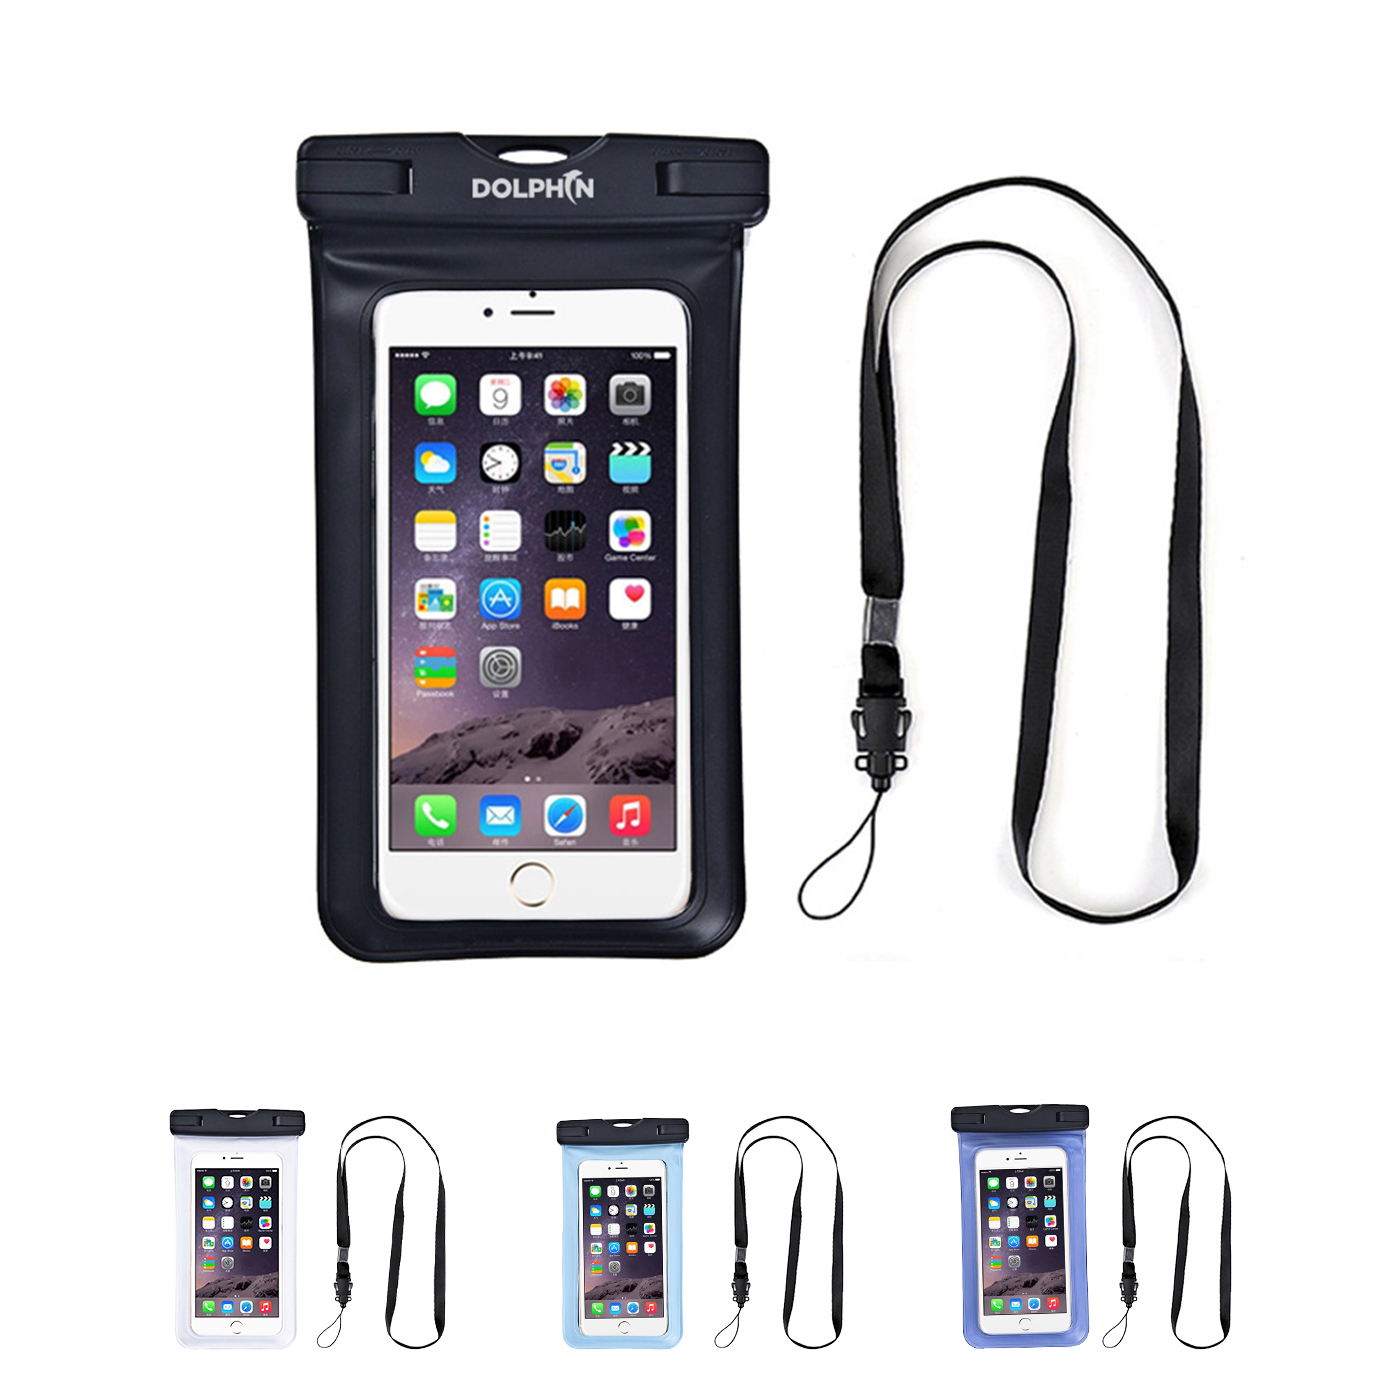 PVC Waterproof Phone Pouch With Lanyard